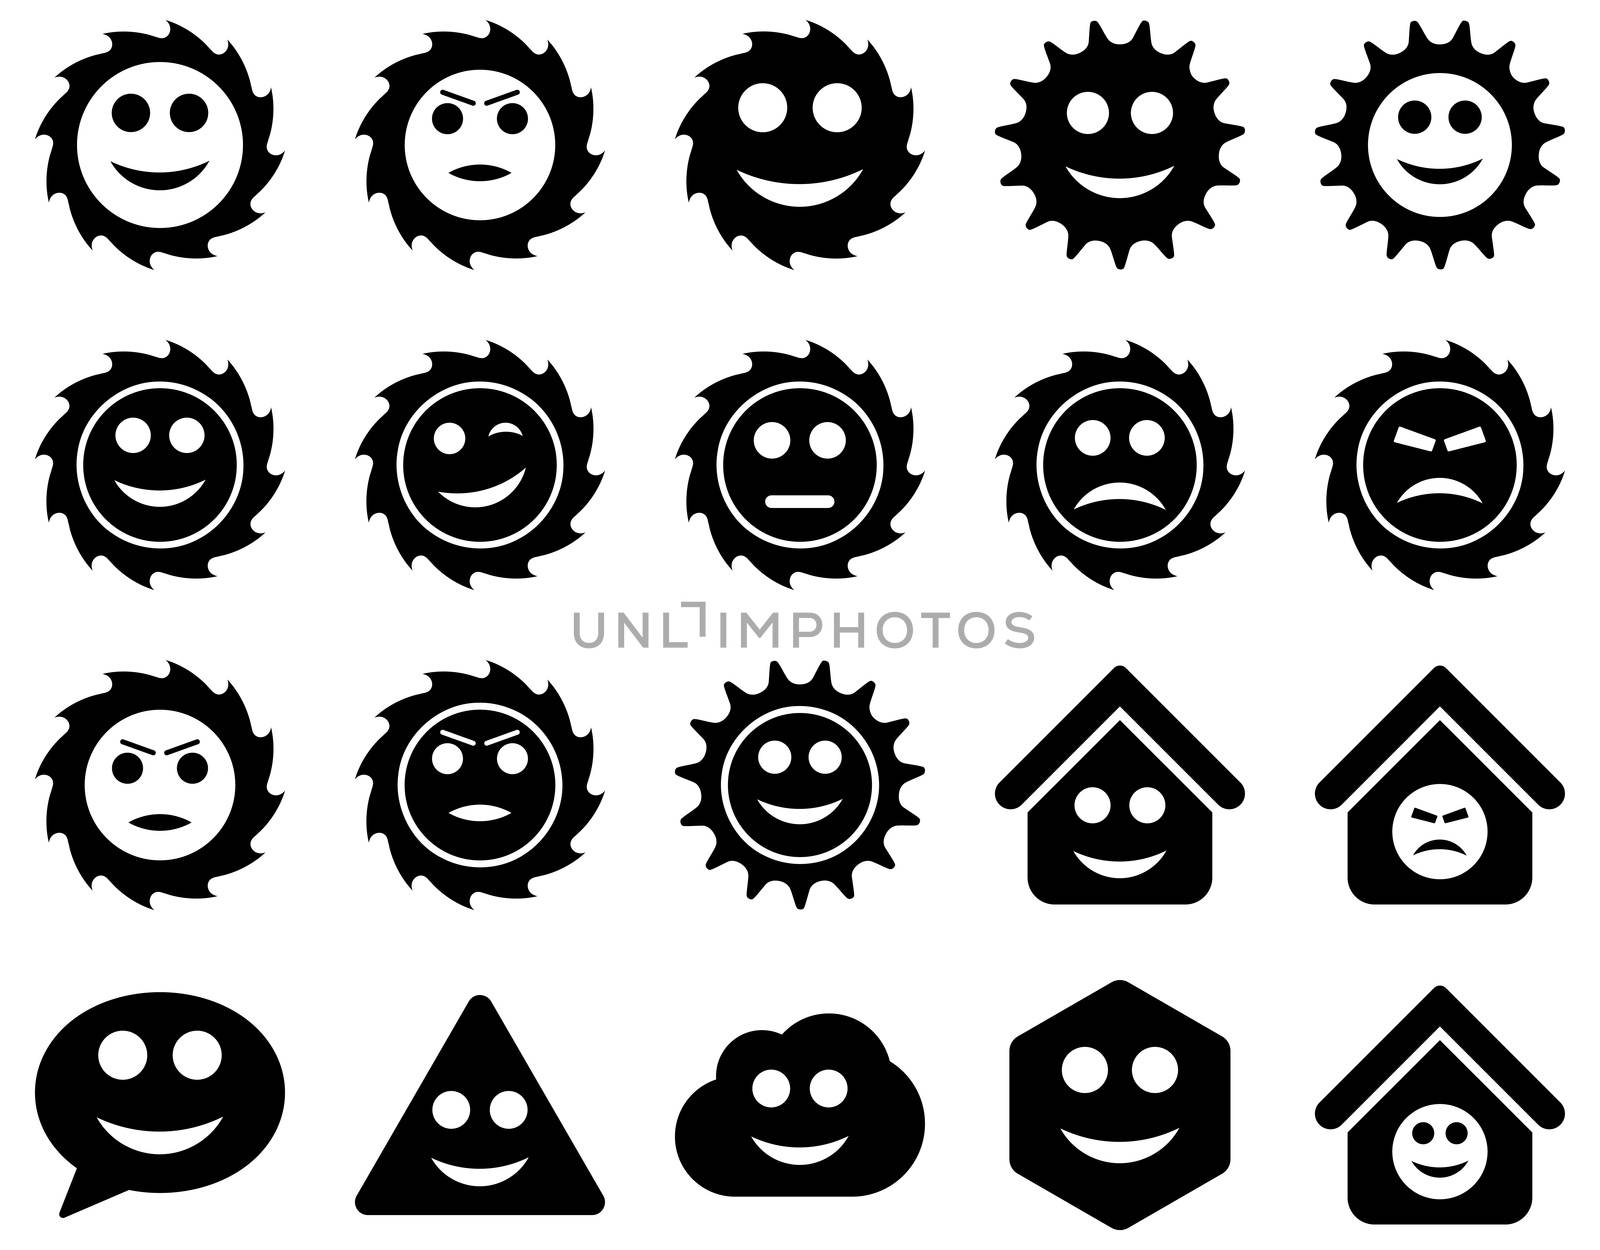 Tools, gears, smiles, emotions icons by ahasoft